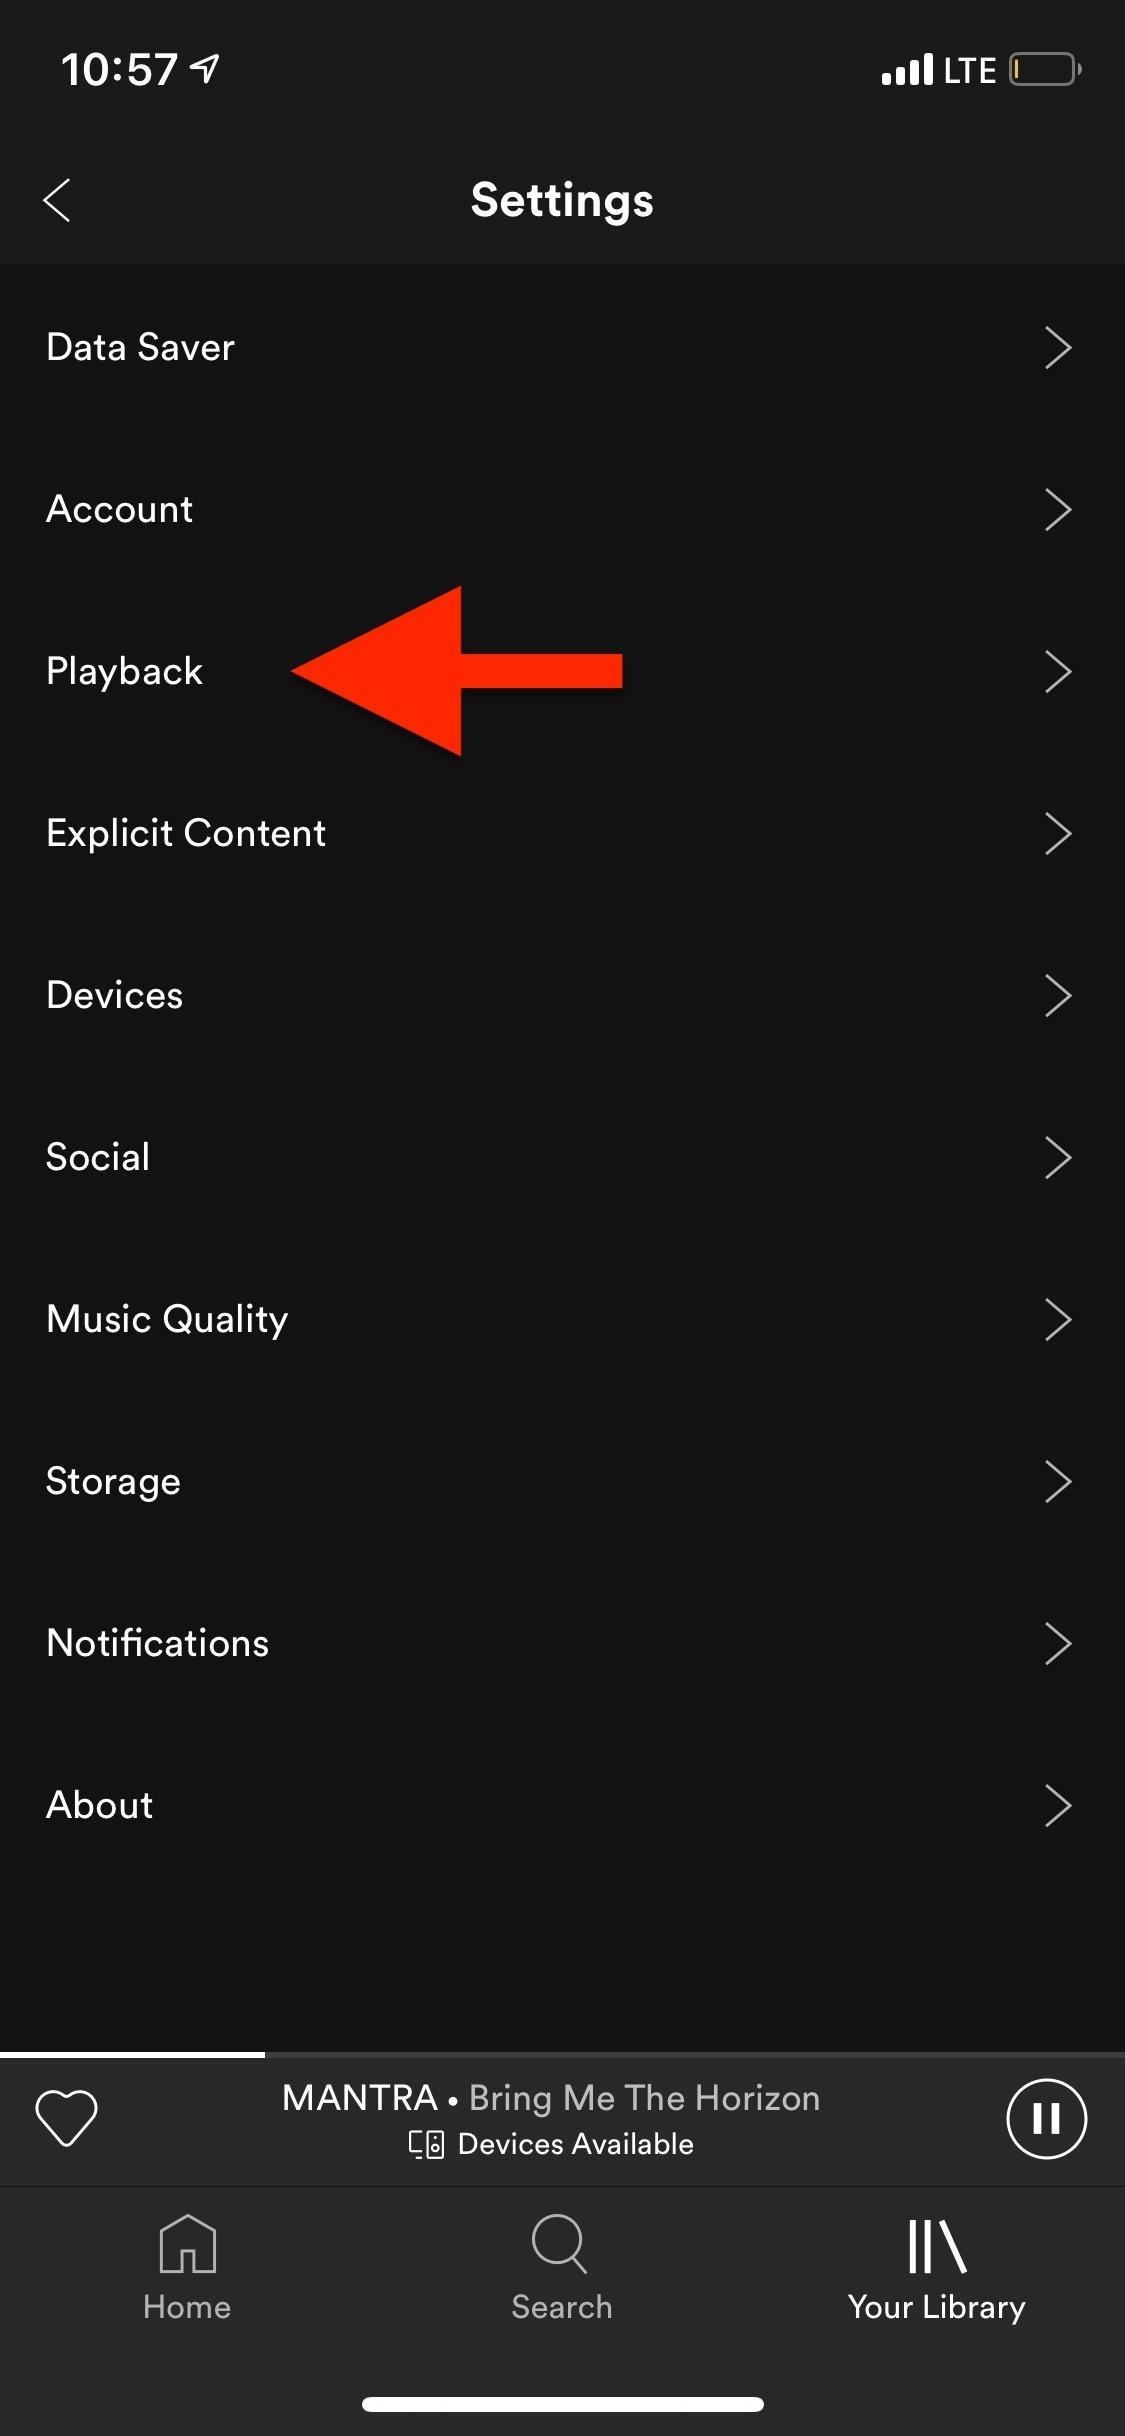 How to Disable Those Annoying Looping Videos When Playing Songs on Spotify